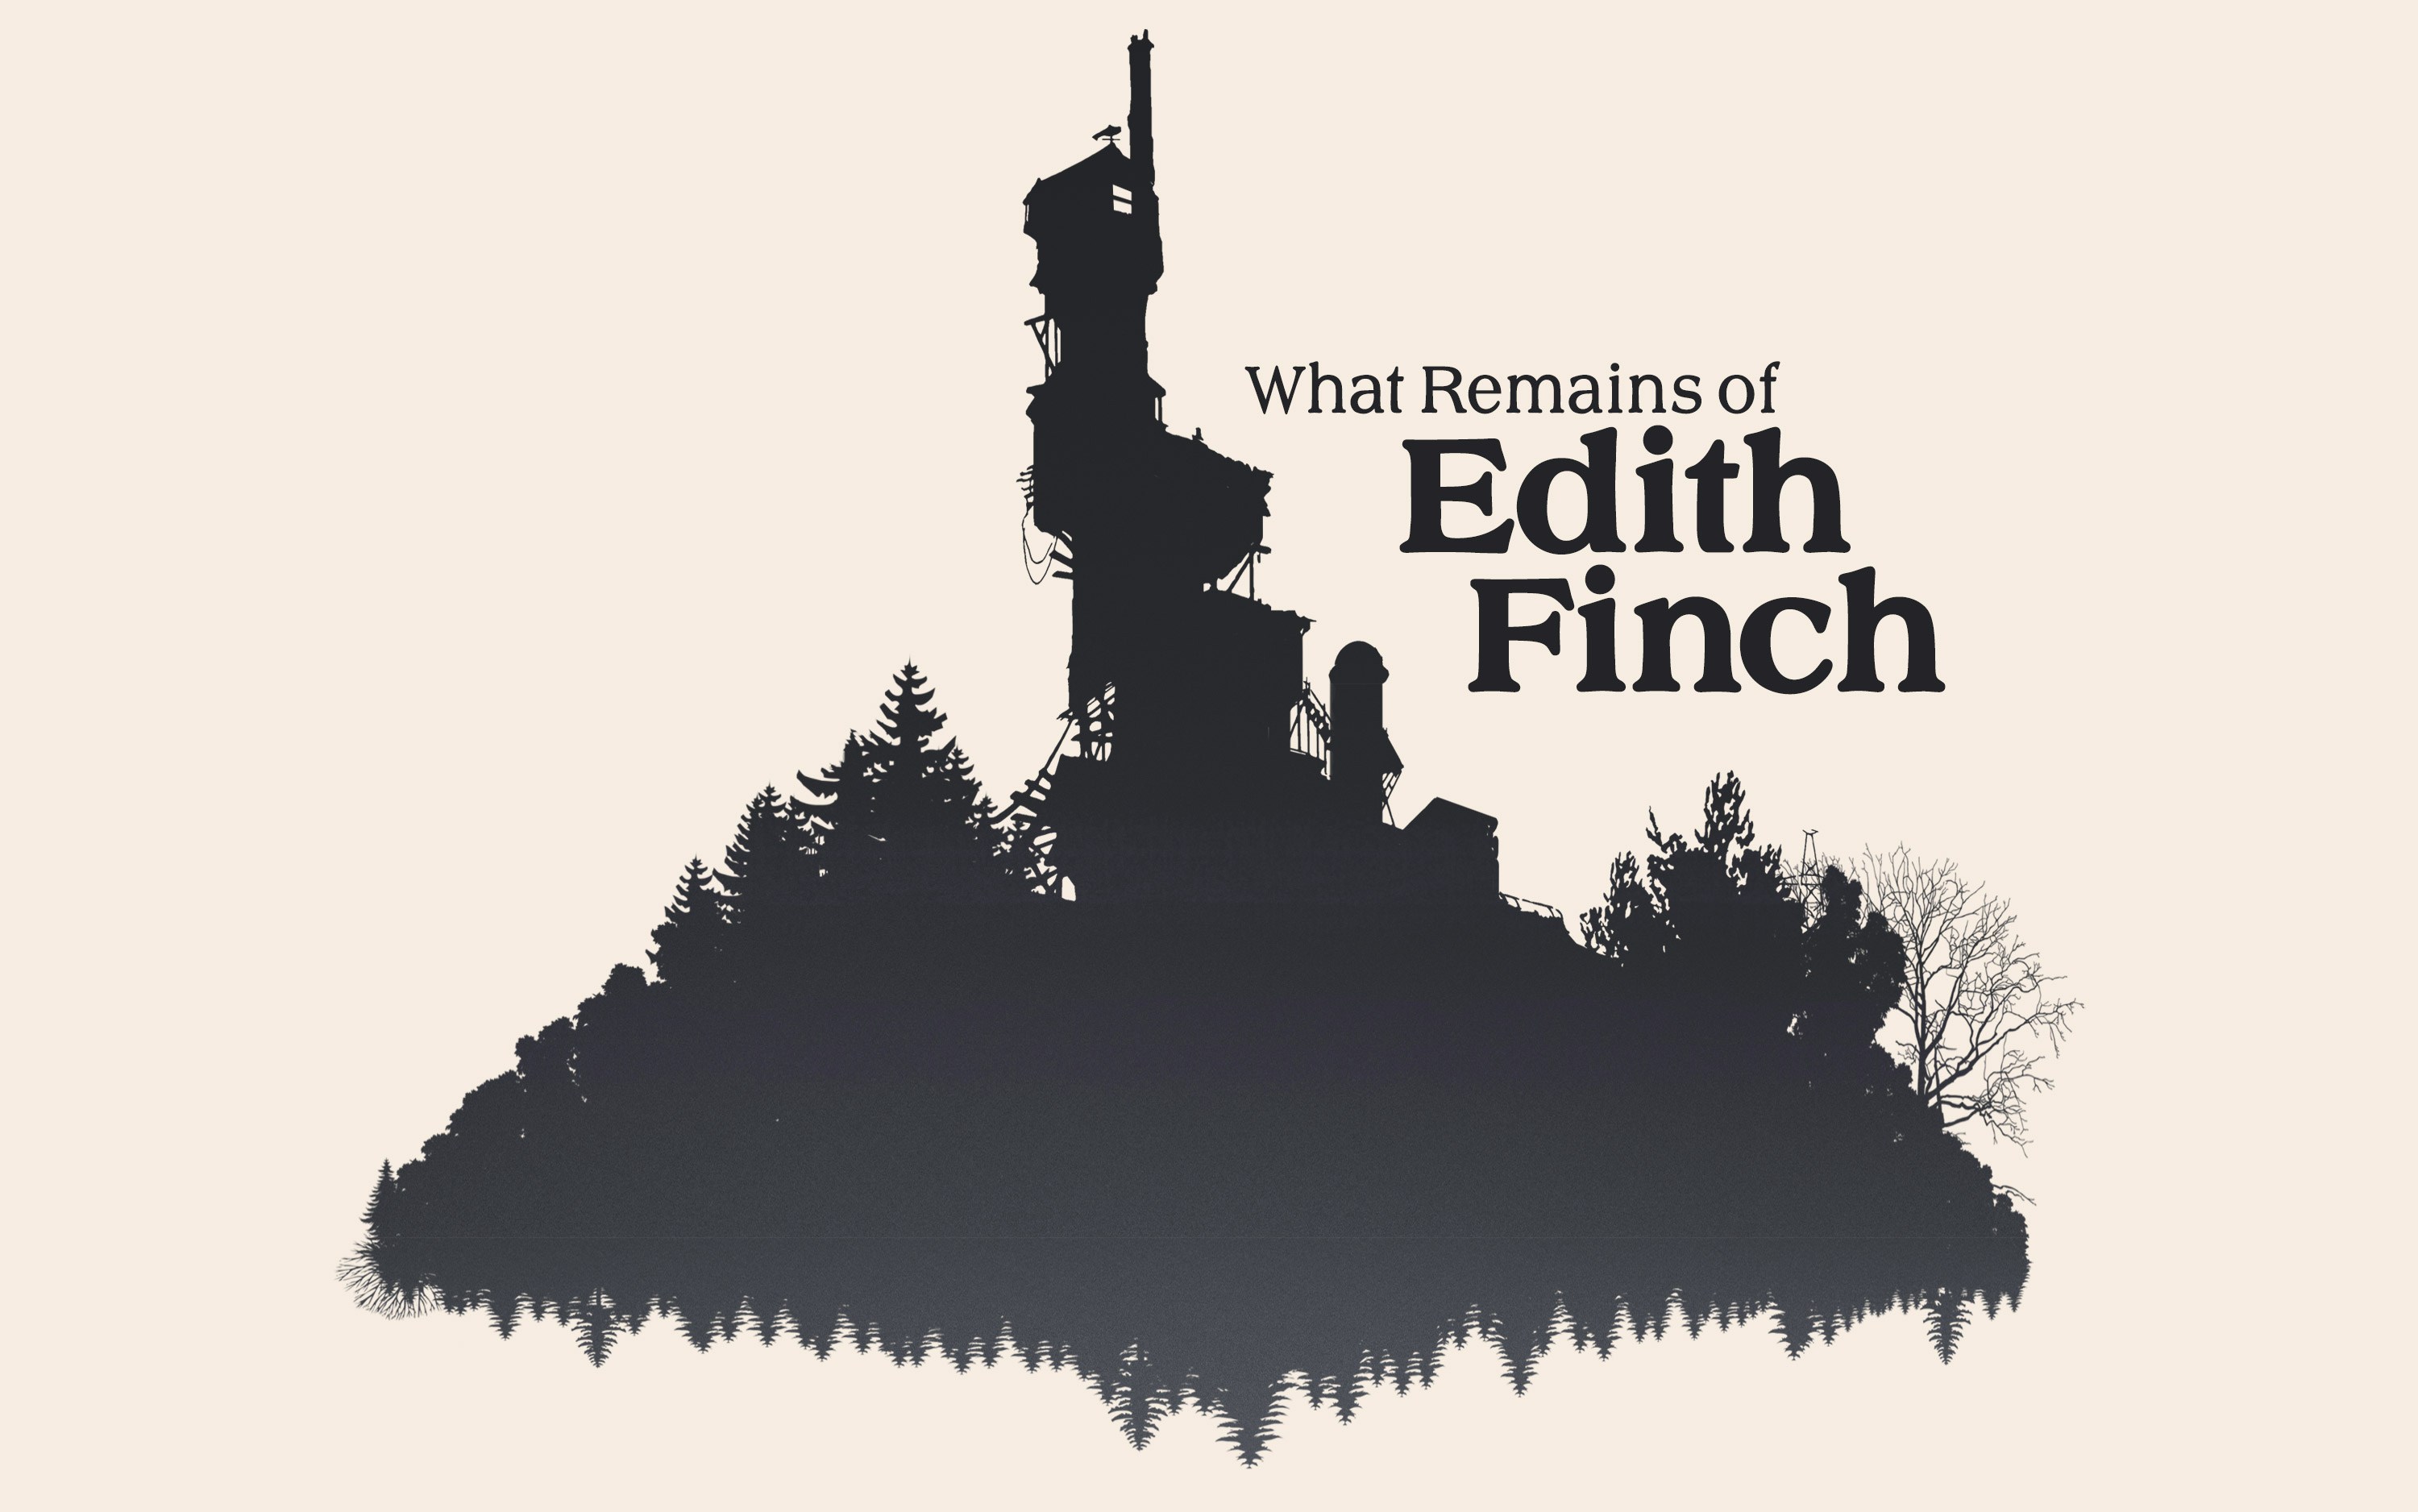 045: What Remains of Edith Finch